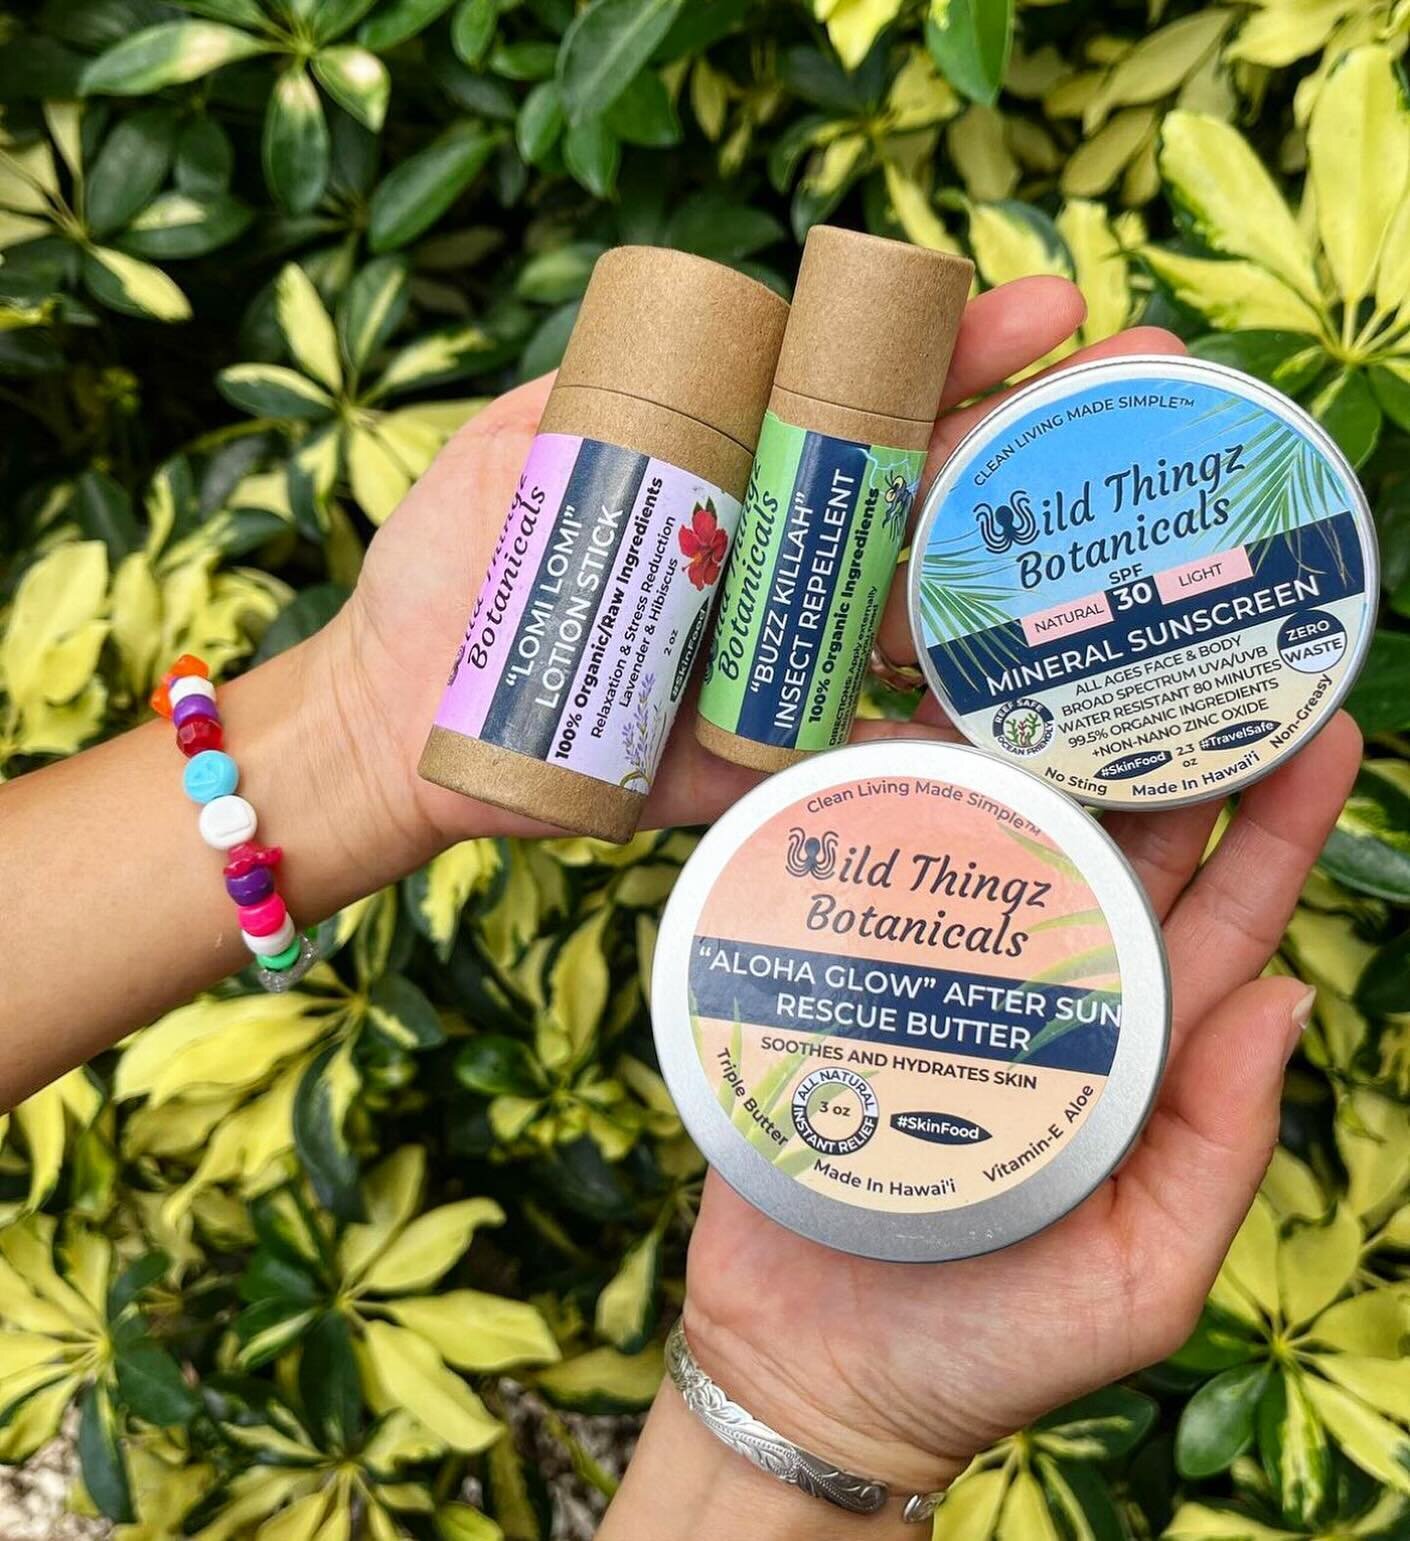 Sustainable &amp; natural &ldquo;skin food&rdquo;, @wildthingzbotanicals make organic, plastic free body products with our precious ecosystem in mind. 🌎🐬

Next Saturday, you won&rsquo;t want to miss their pop-up and grab a tube of their vibrant col